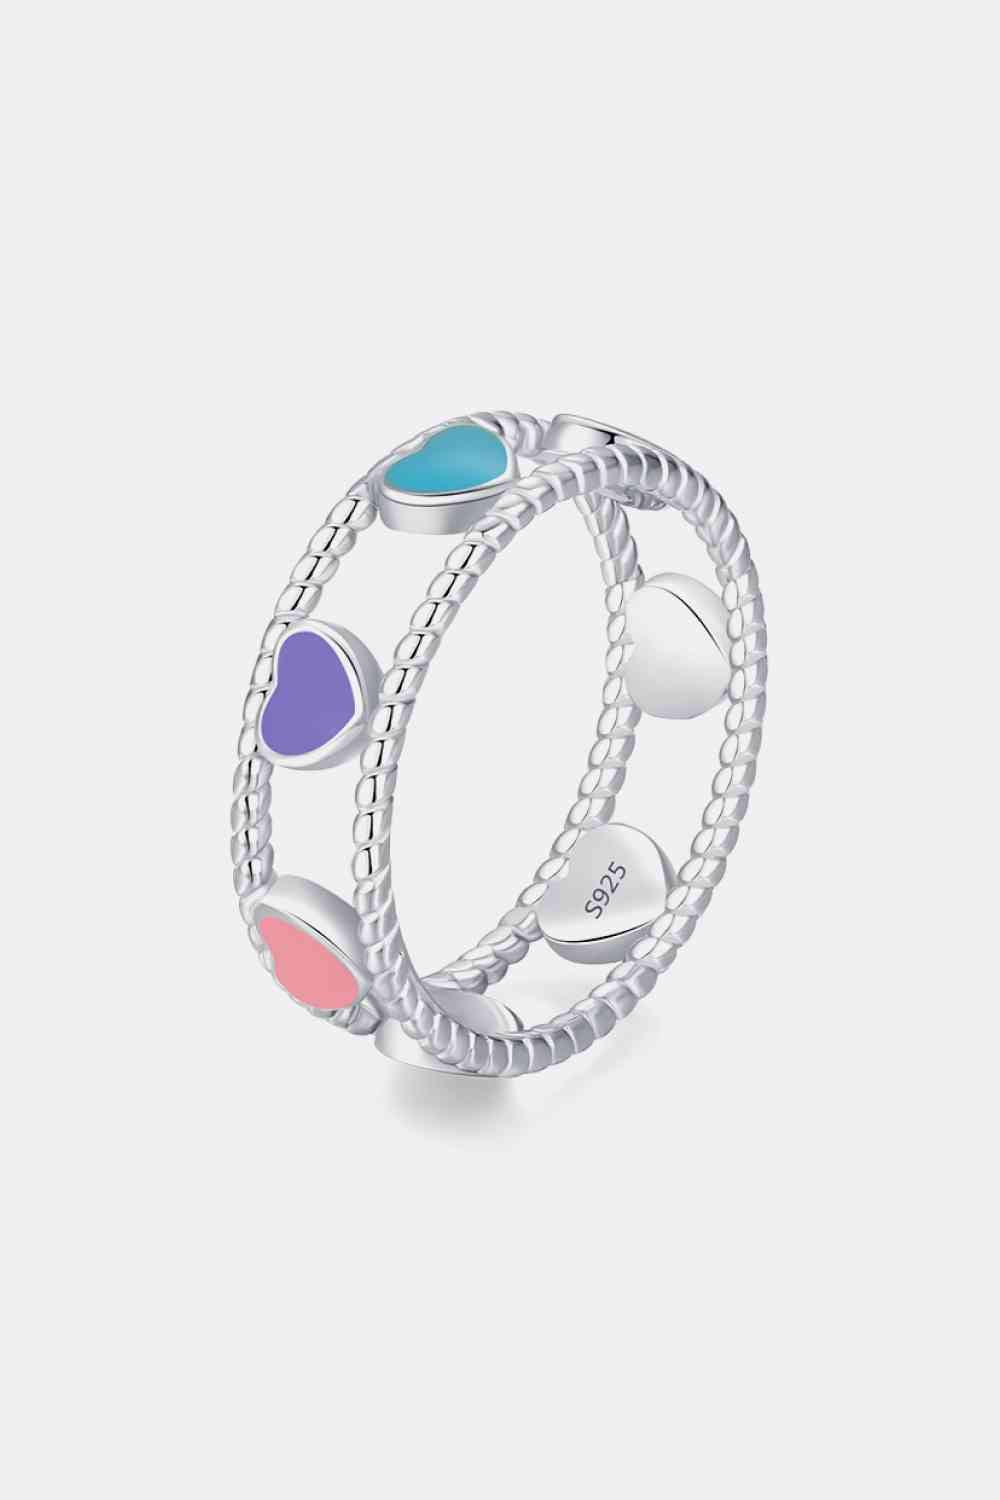 Rings - God's Girl Gifts And Apparel